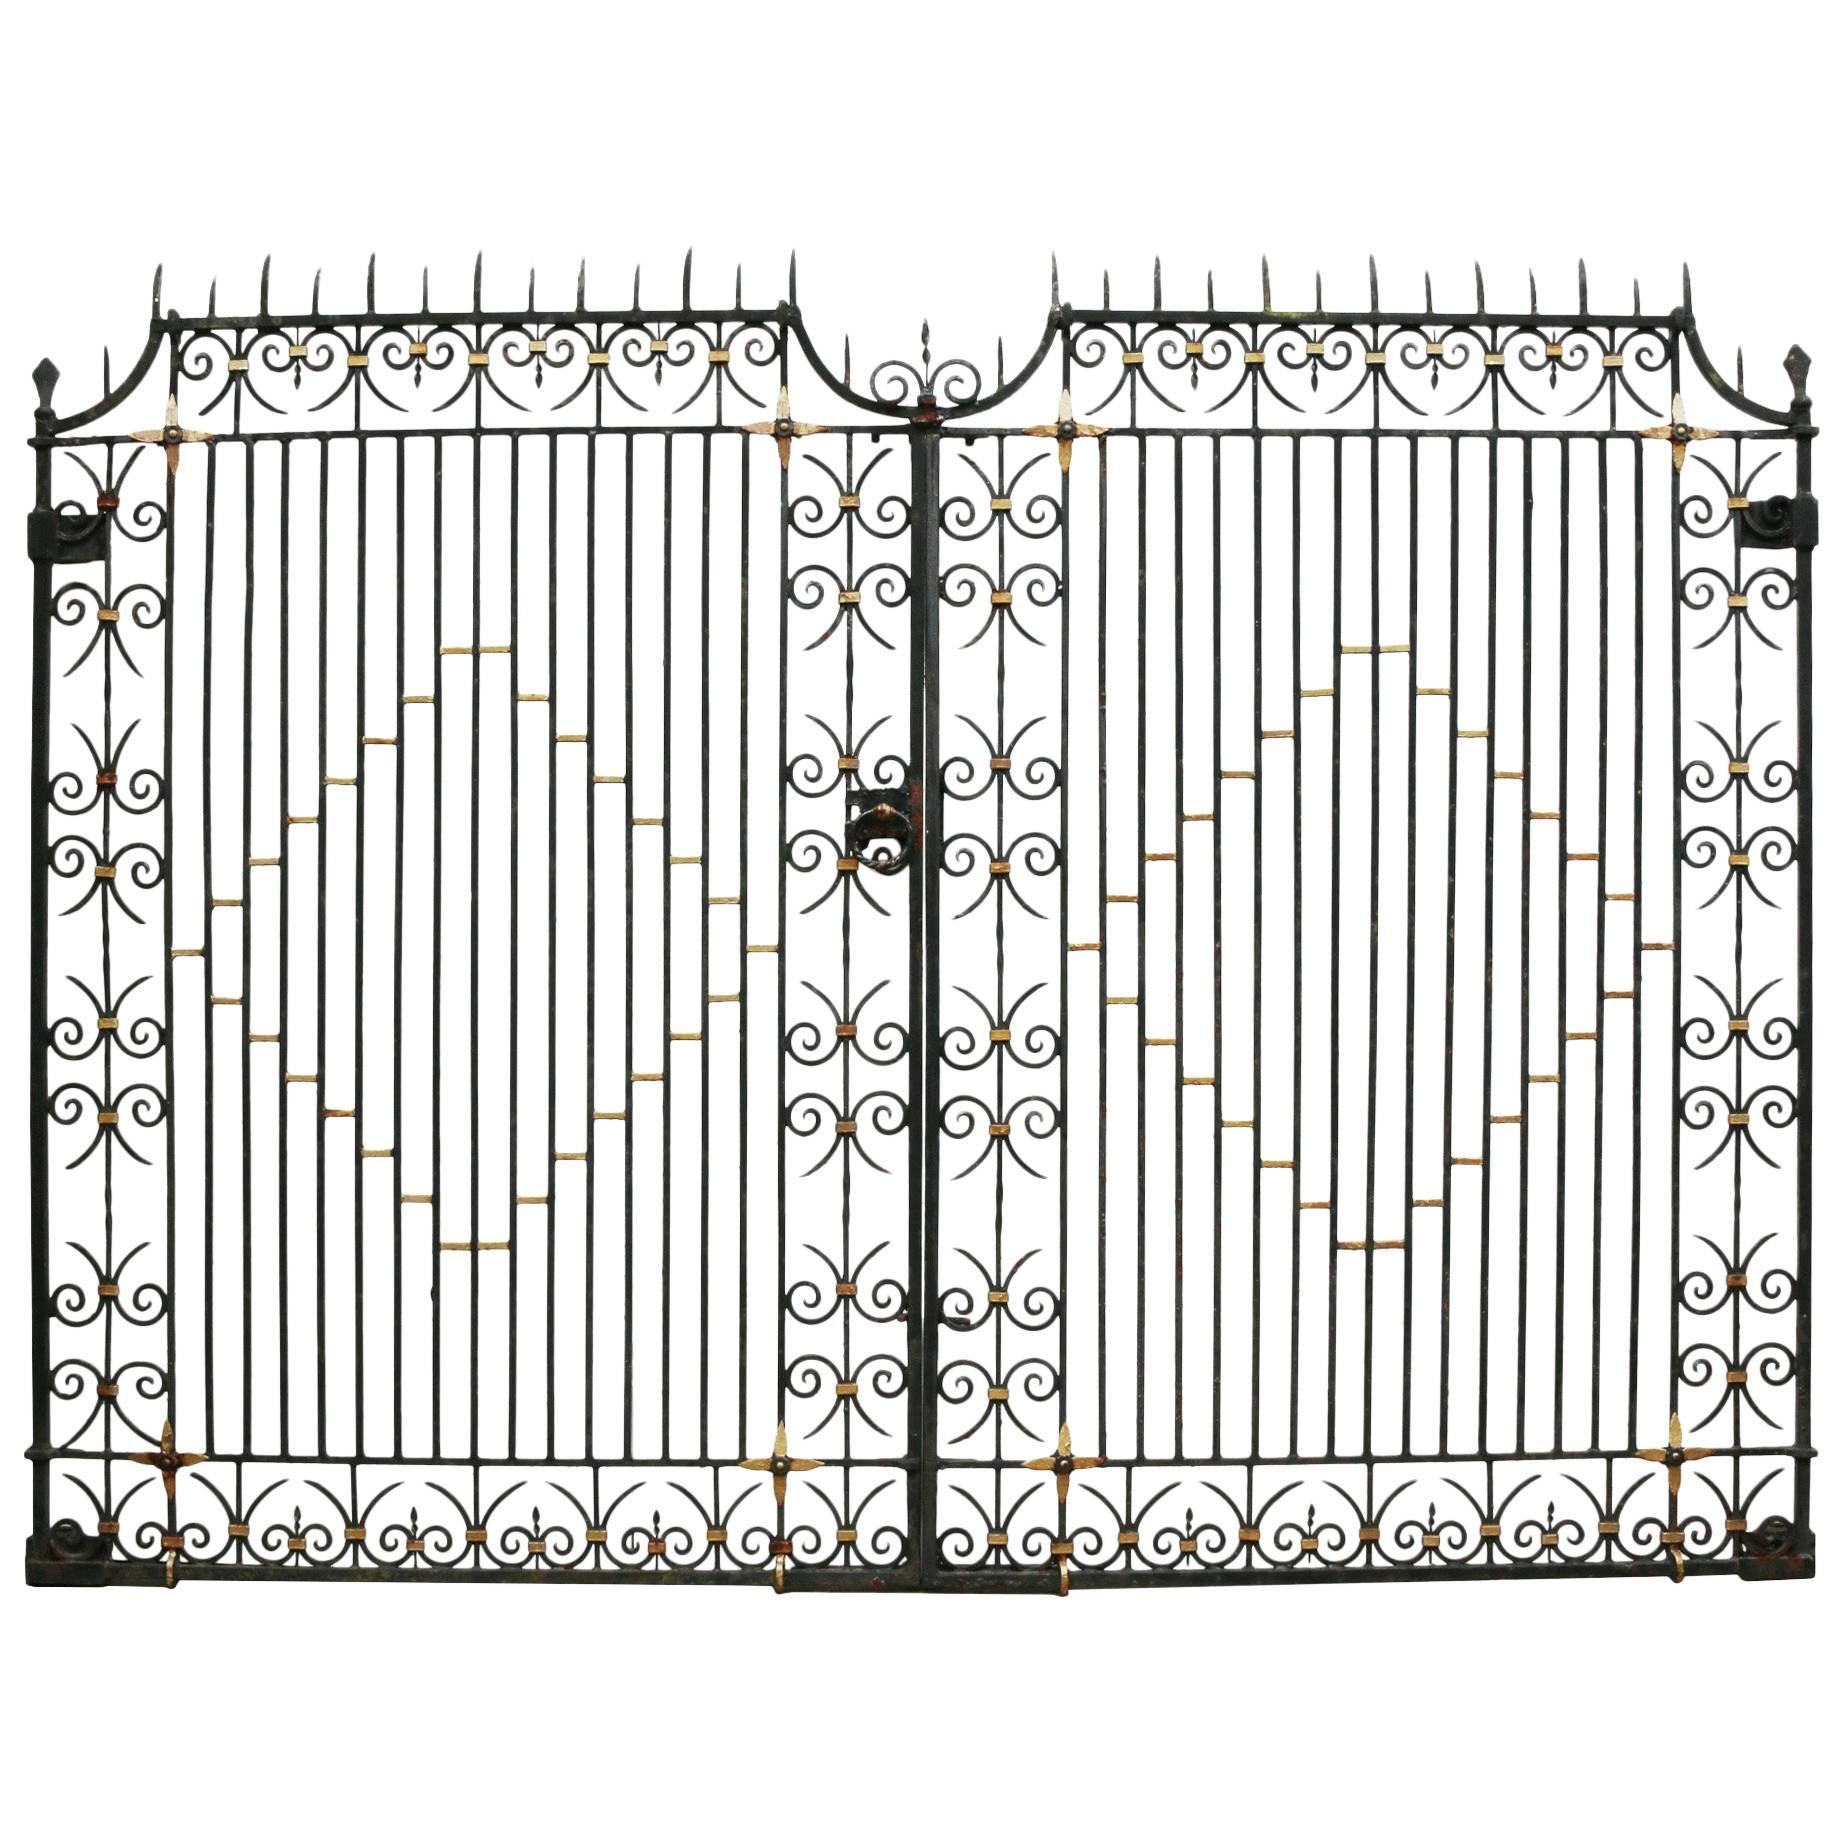 Pair of Reclaimed Wrought Iron Driveway or Entrance Gates